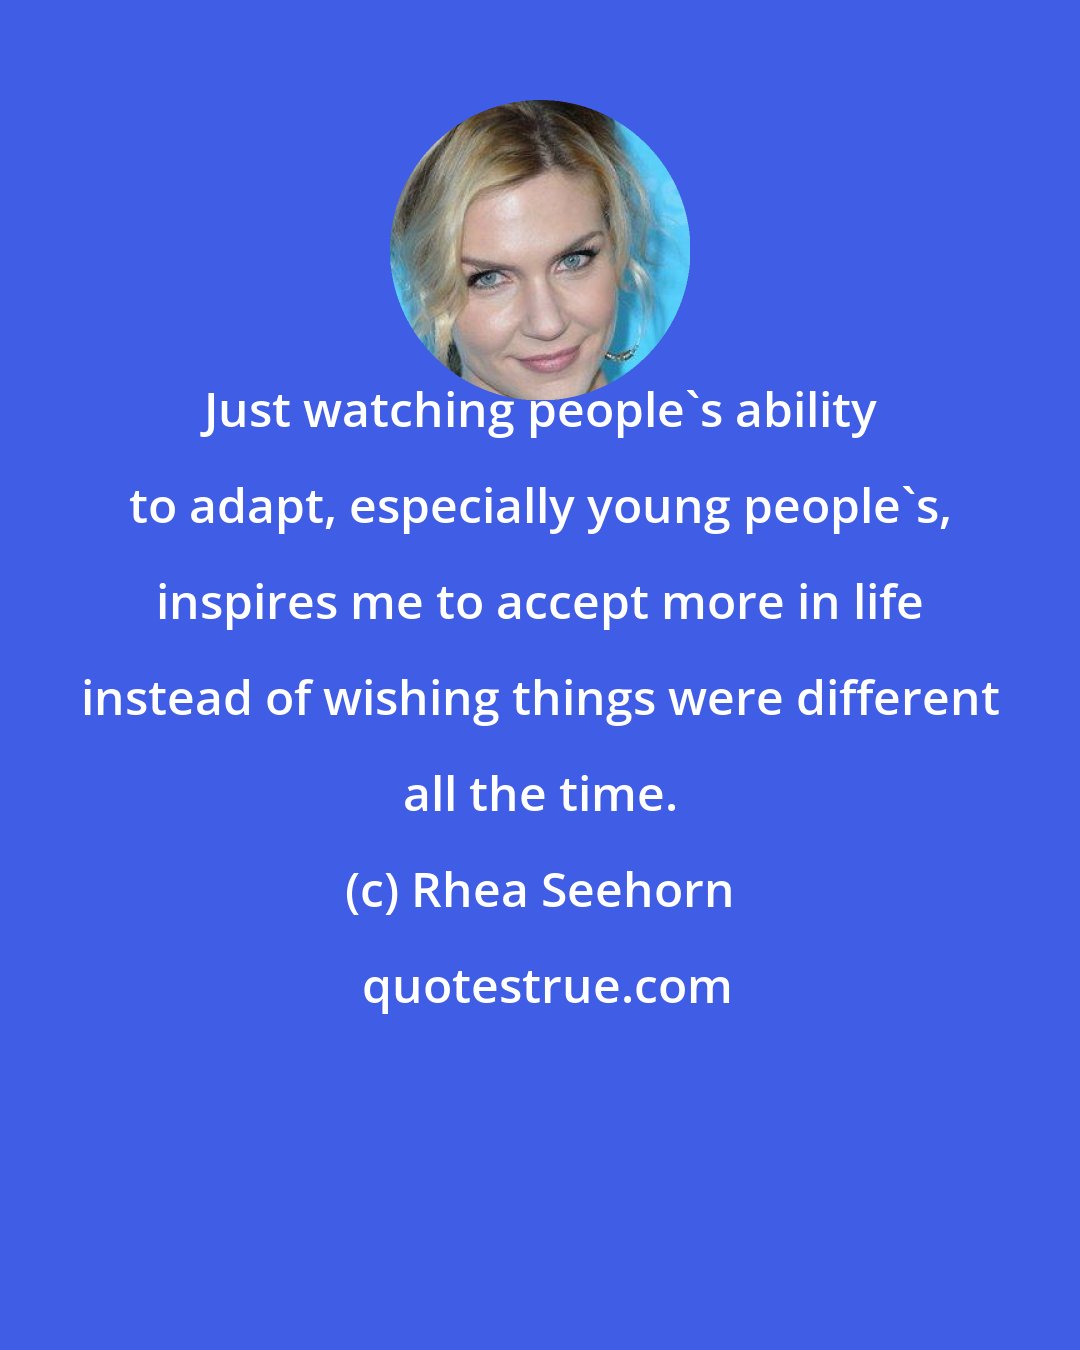 Rhea Seehorn: Just watching people's ability to adapt, especially young people's, inspires me to accept more in life instead of wishing things were different all the time.